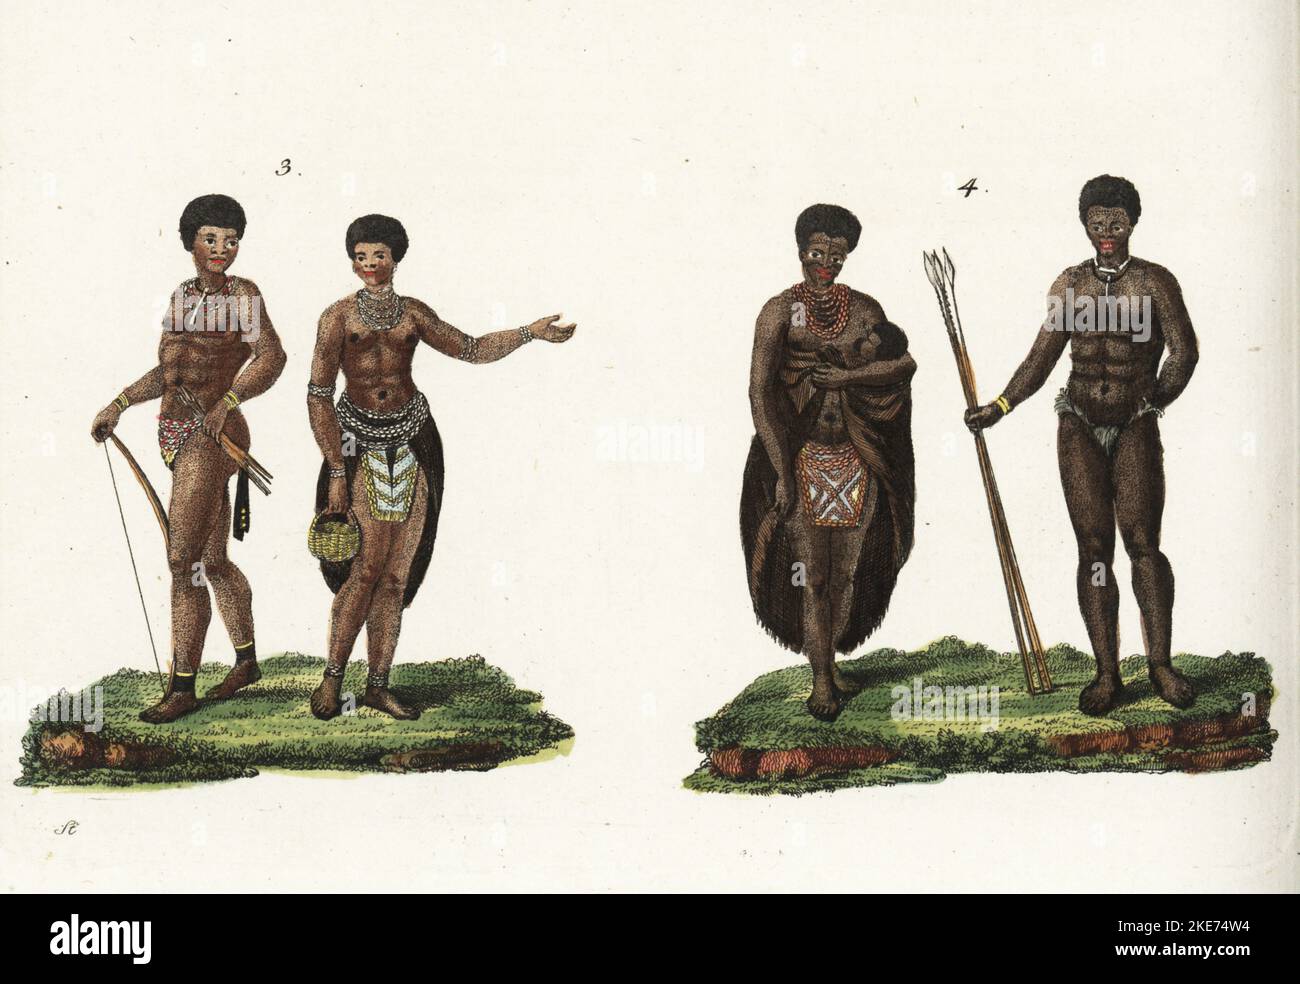 Costumes of the people of Africa, 18th century. Gonaqua man with bow and arrow, woman in beaded apron and skirts 3, and Xhosa or Zulu man in collar and loincloth with assegai, woman in beaded apron, sheepskin cloak holding a baby 4. Handcoloured copperplate engraving from Friedrich Johann Bertuch's Bilderbuch fur Kinder (Picture Book for Children), Weimar, 1792. Stock Photo